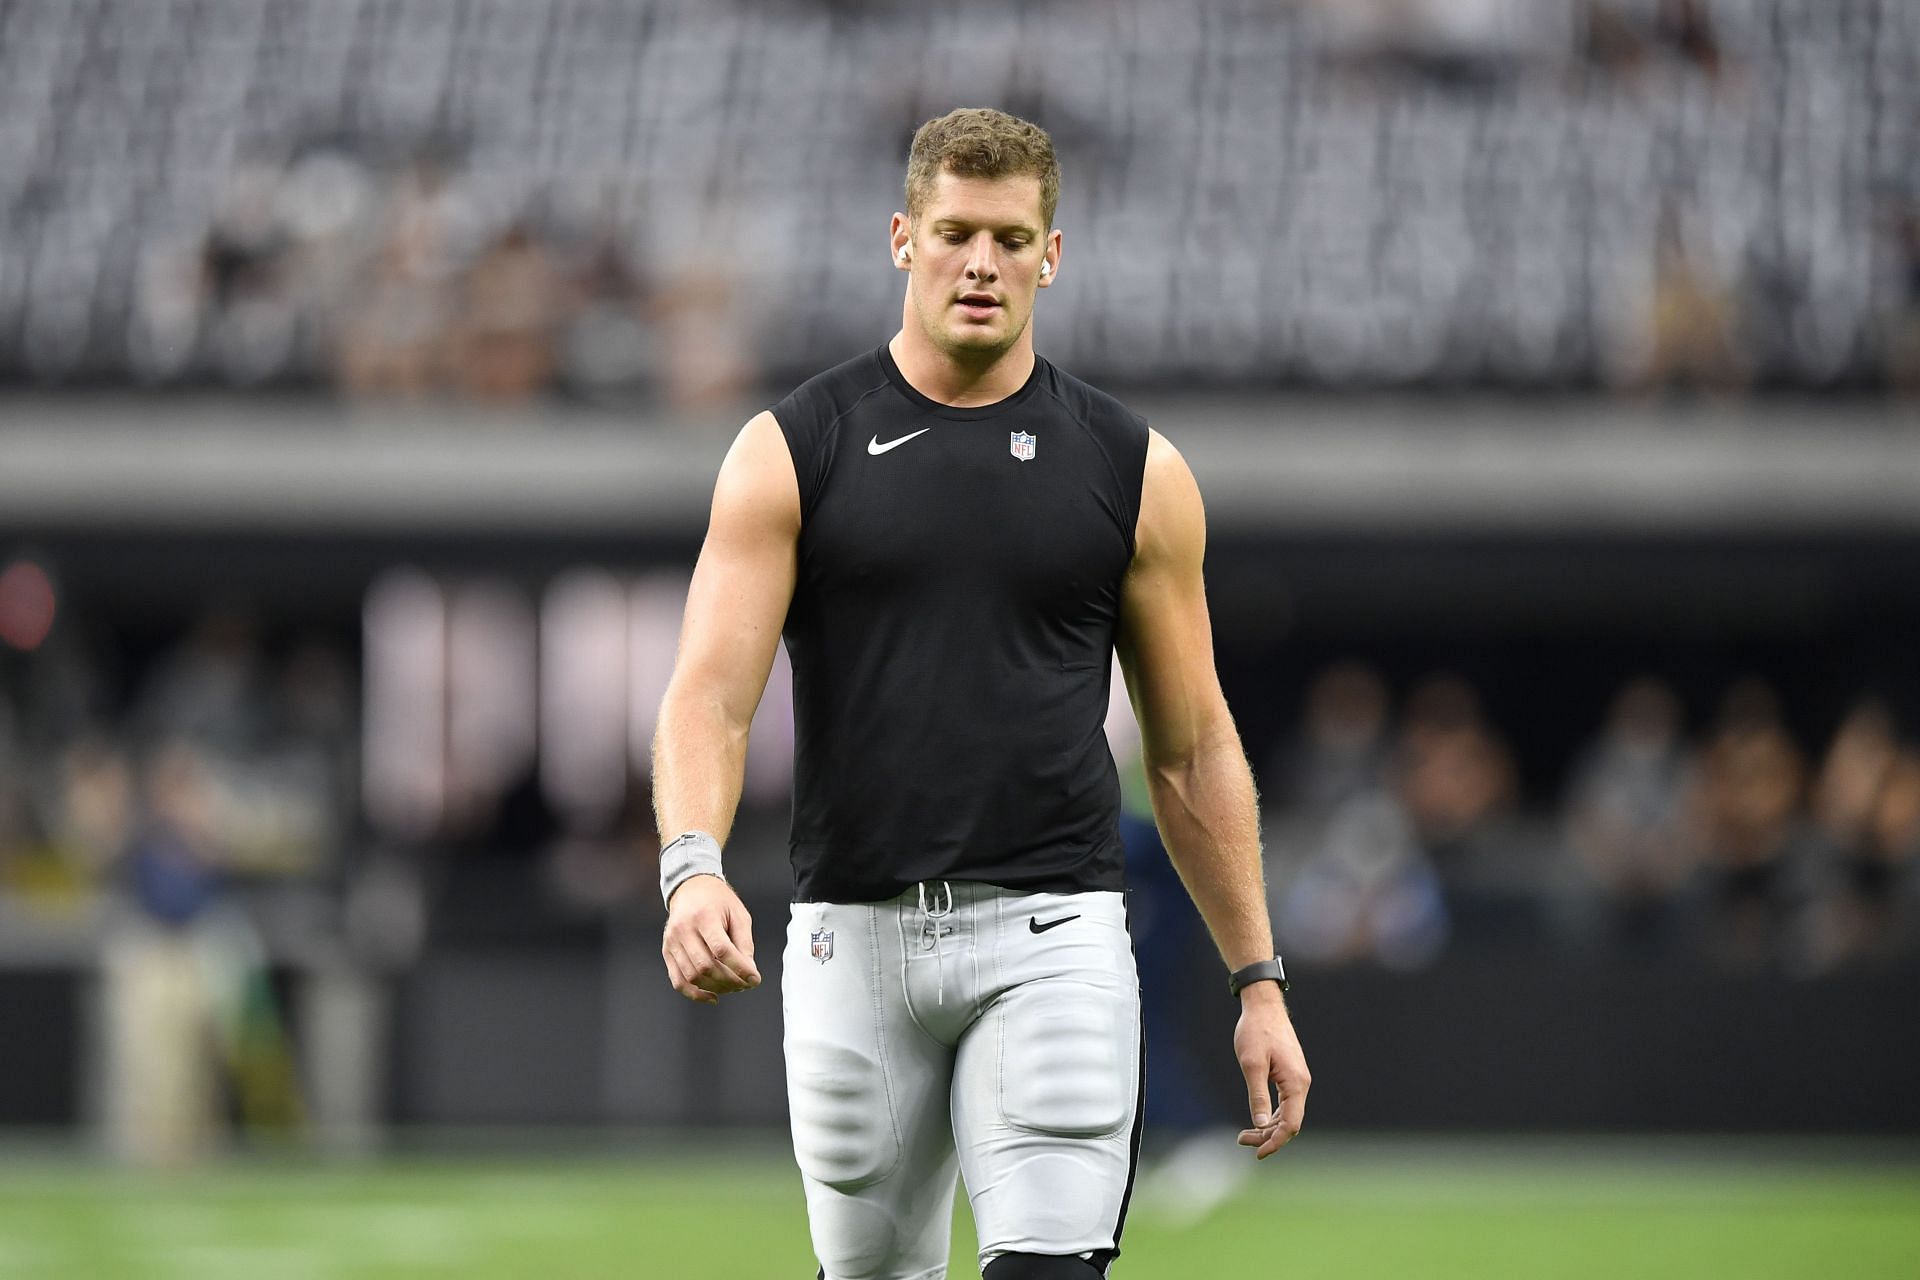 Former Las Vegas Raiders star Carl Nassib recently signed with the Tampa Bay Buccaneers